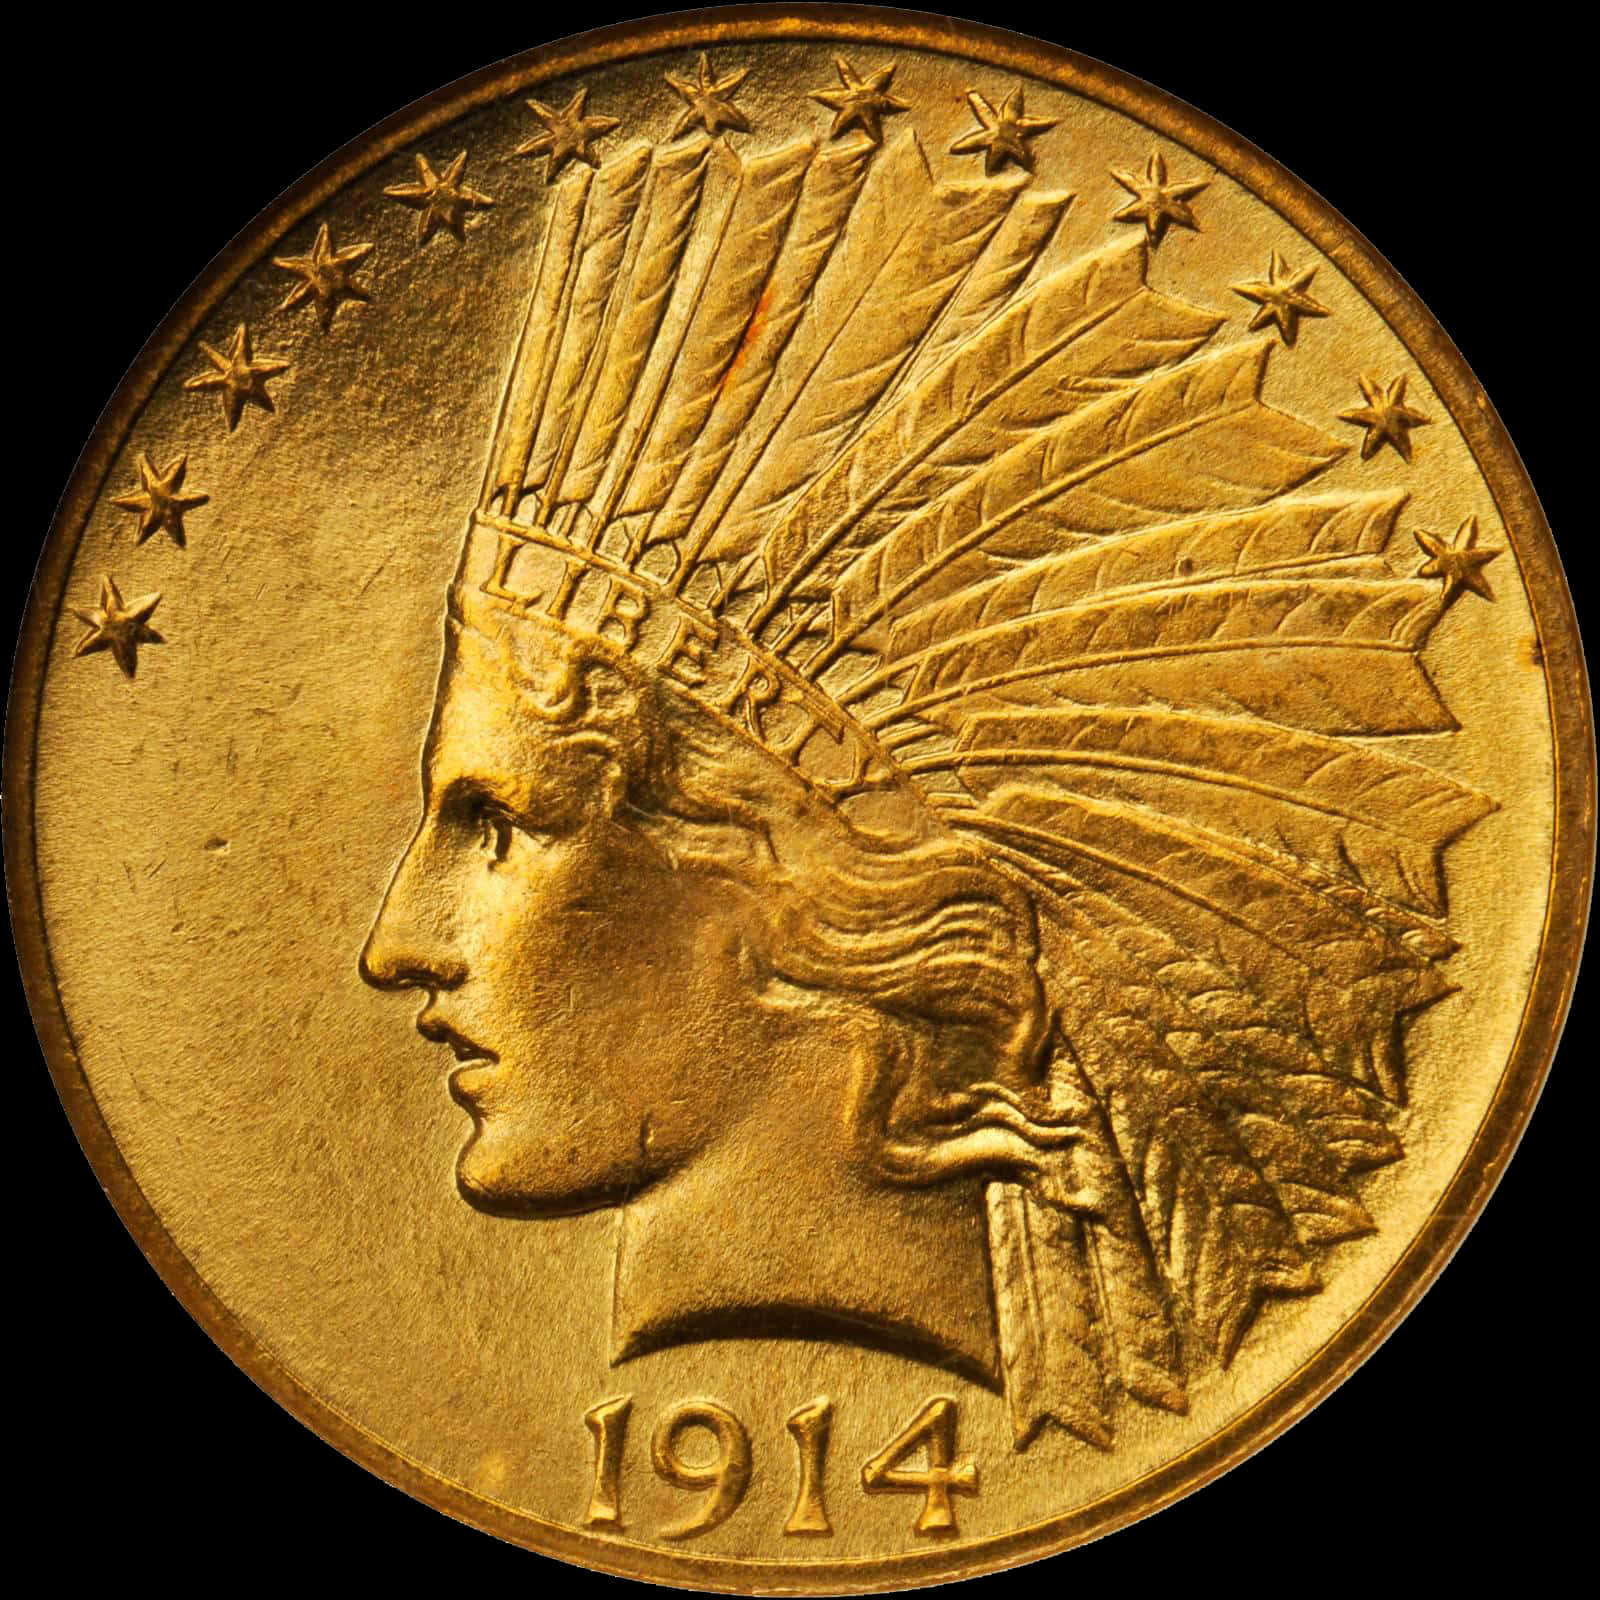 1914 Indian Head Gold Coin PNG image